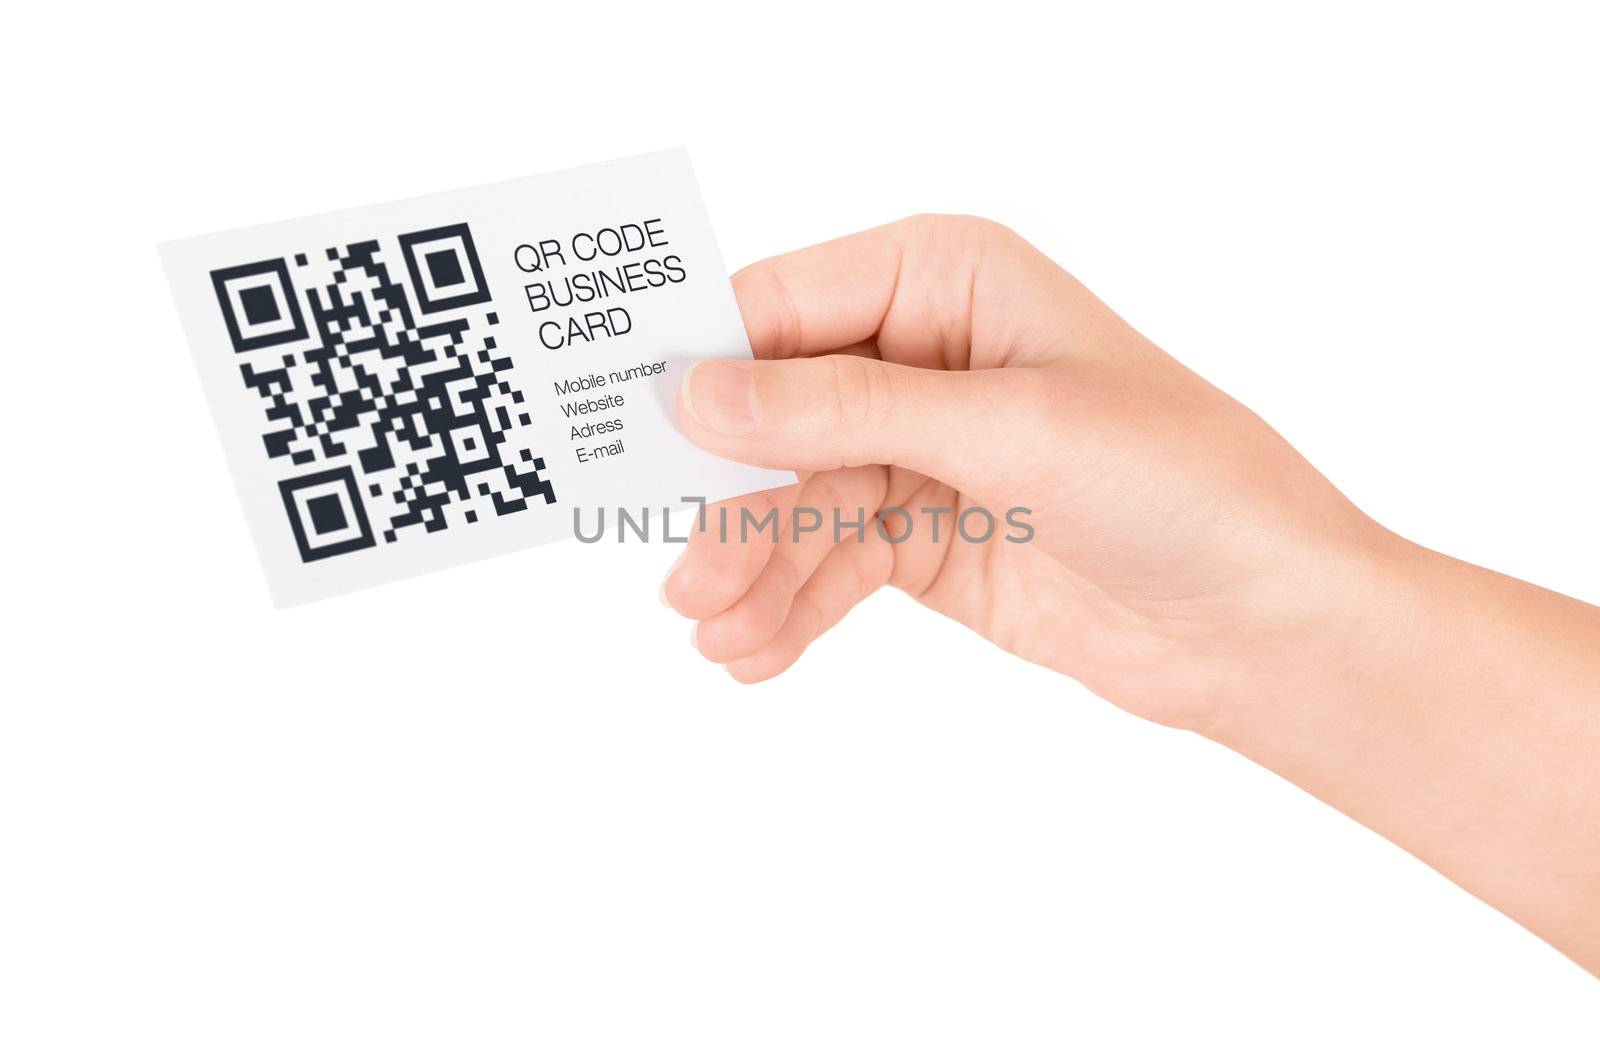 QR Code Business Card Concept by bloomua